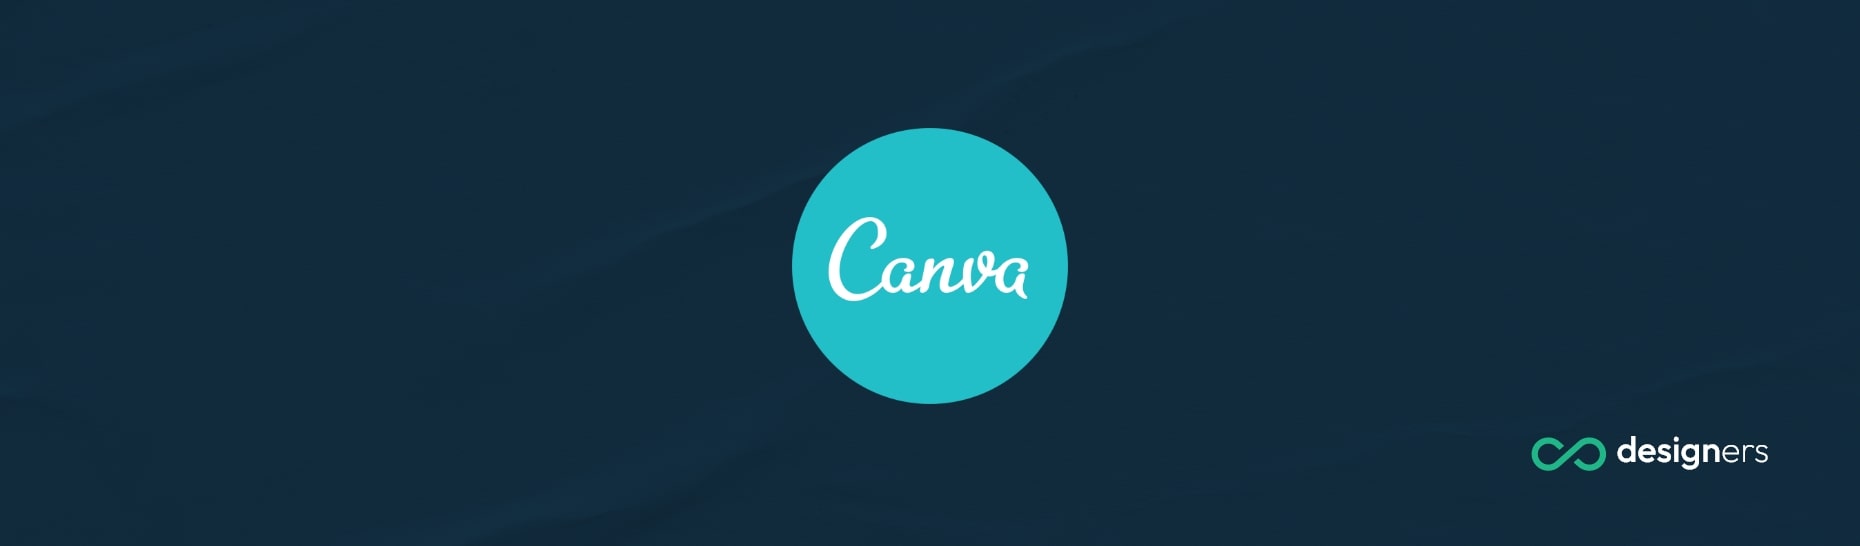 How Do You Make a Coloring Book on Canva? 